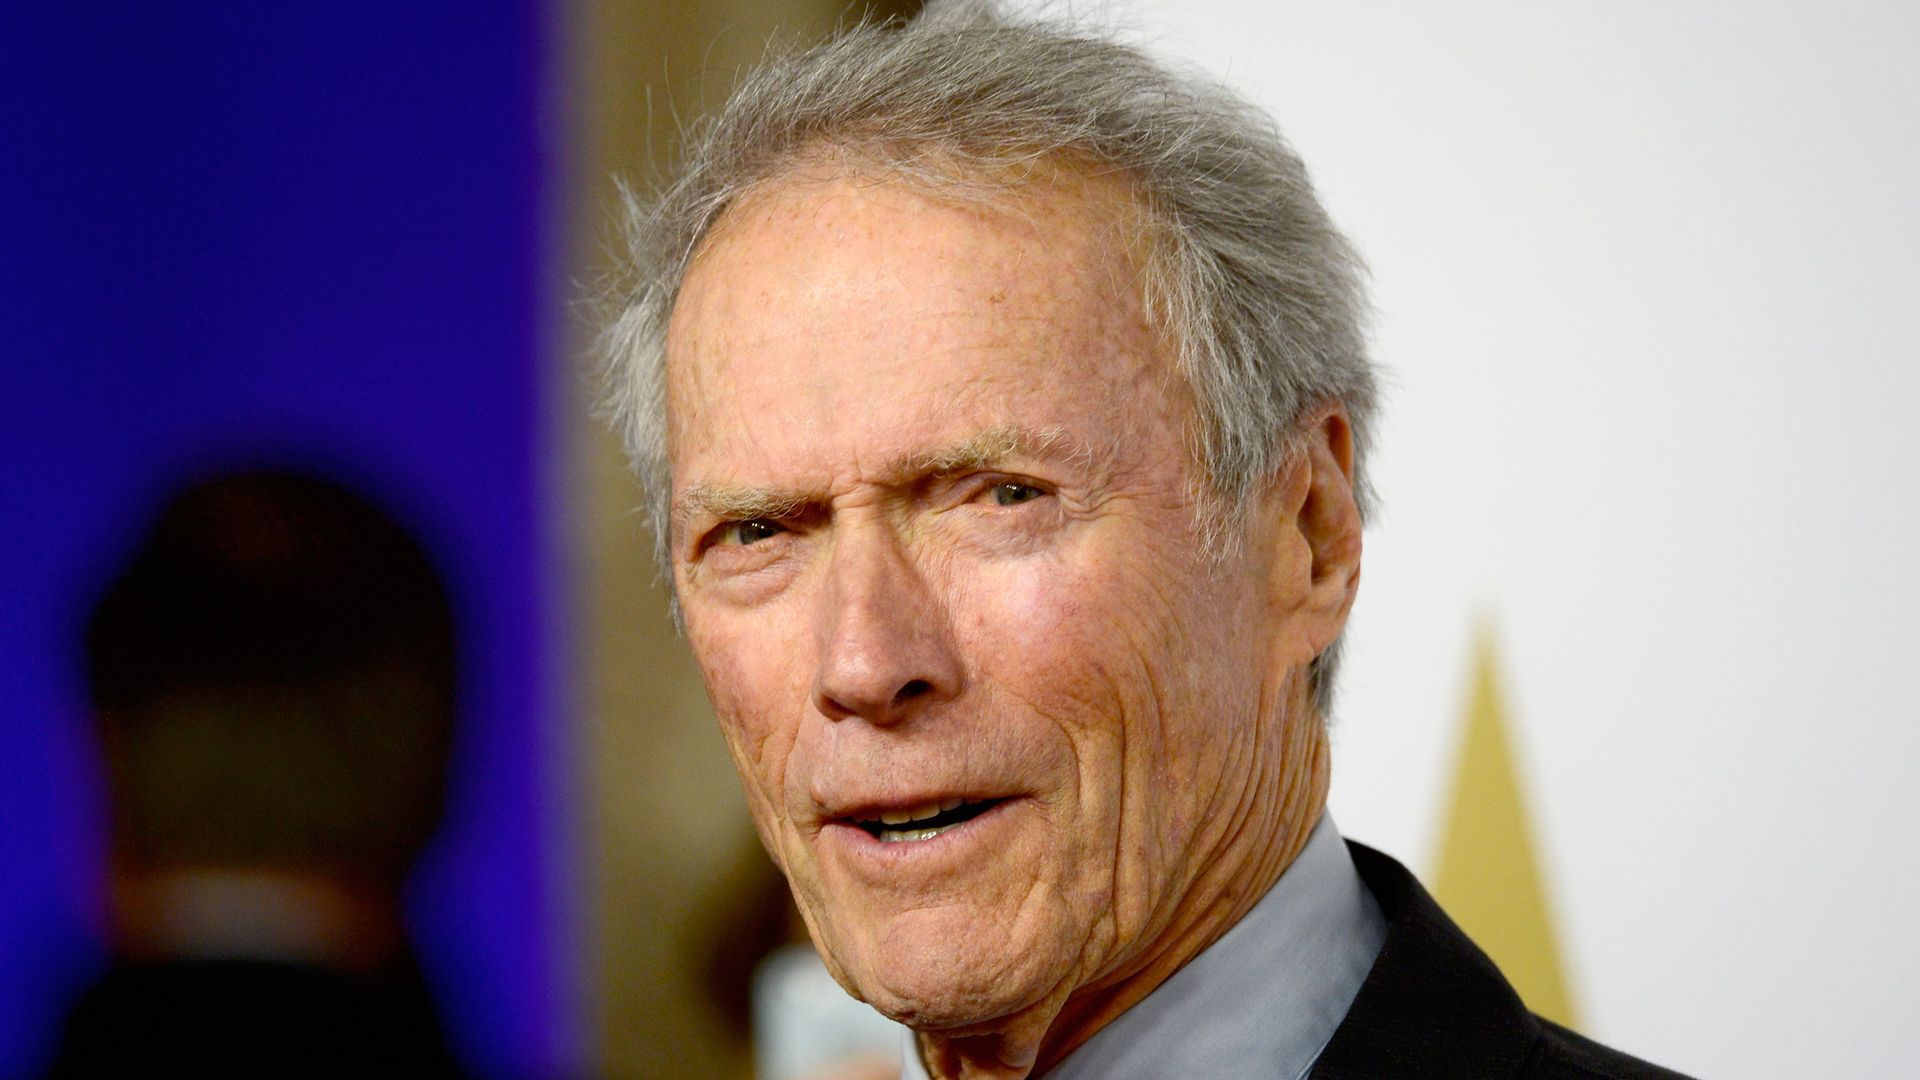 Clint Eastwood suit and tie